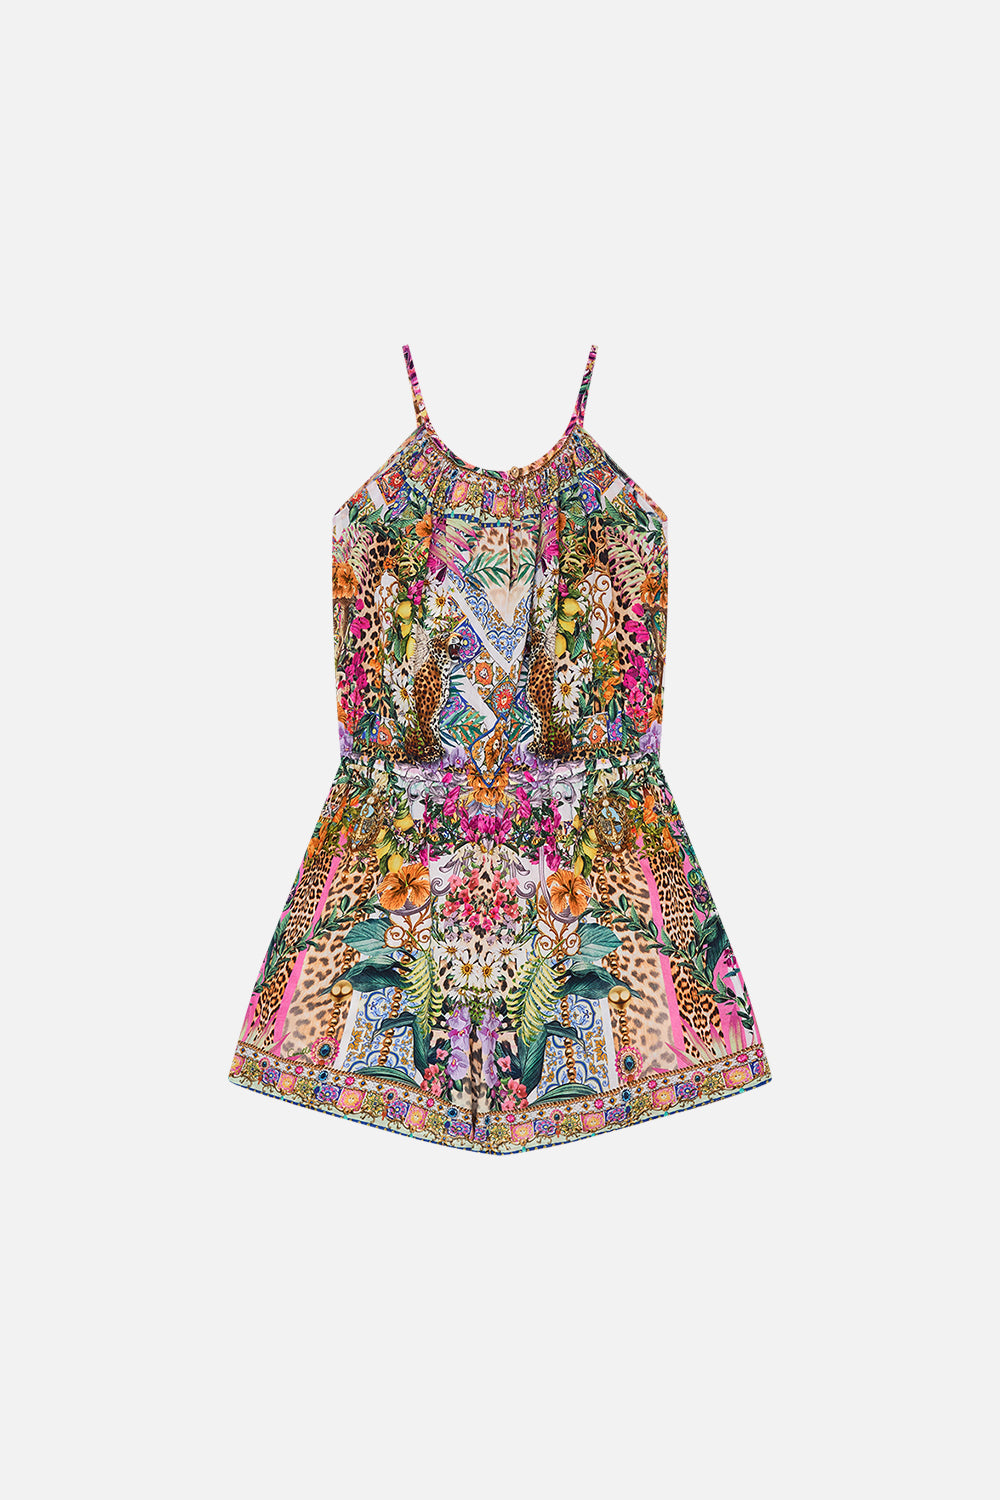 Milla by CAMILLA kids floral playsuit in Flowers Of Neptune print